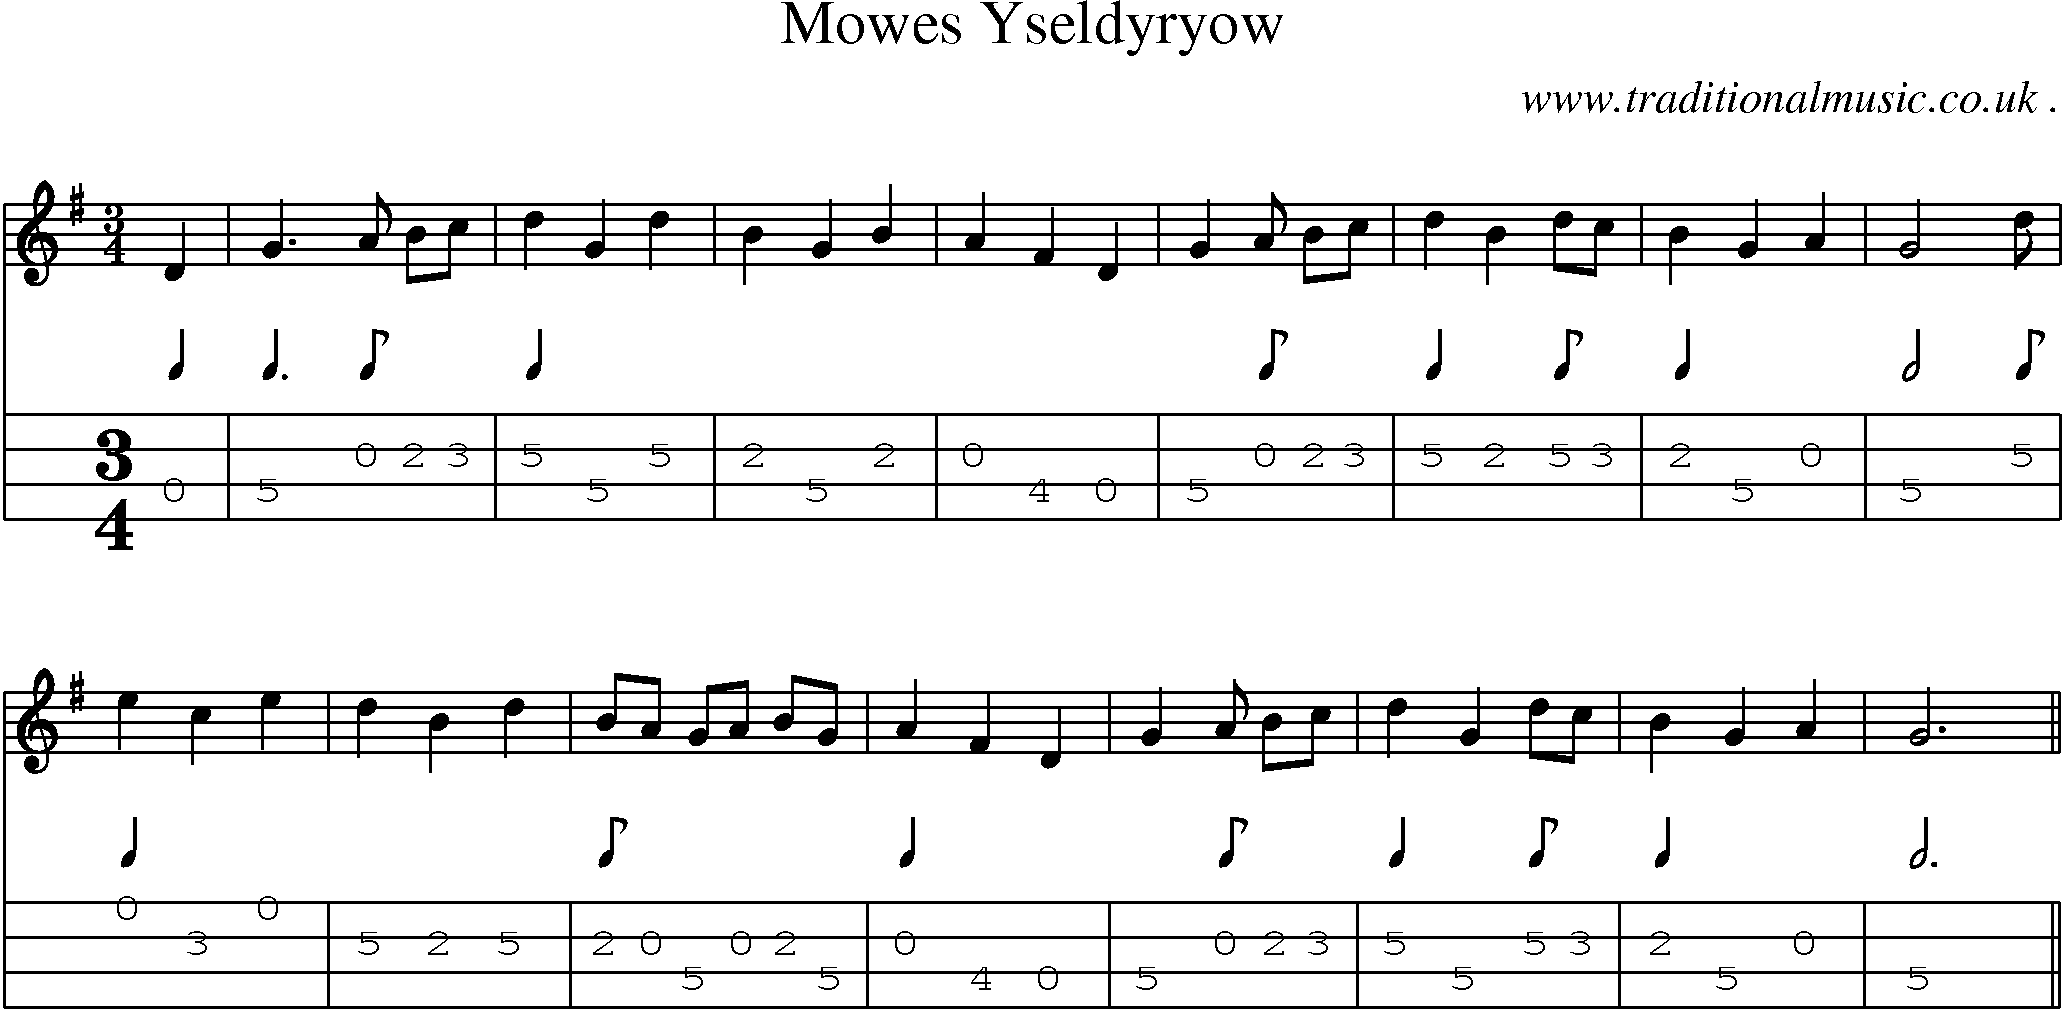 Sheet-Music and Mandolin Tabs for Mowes Yseldyryow